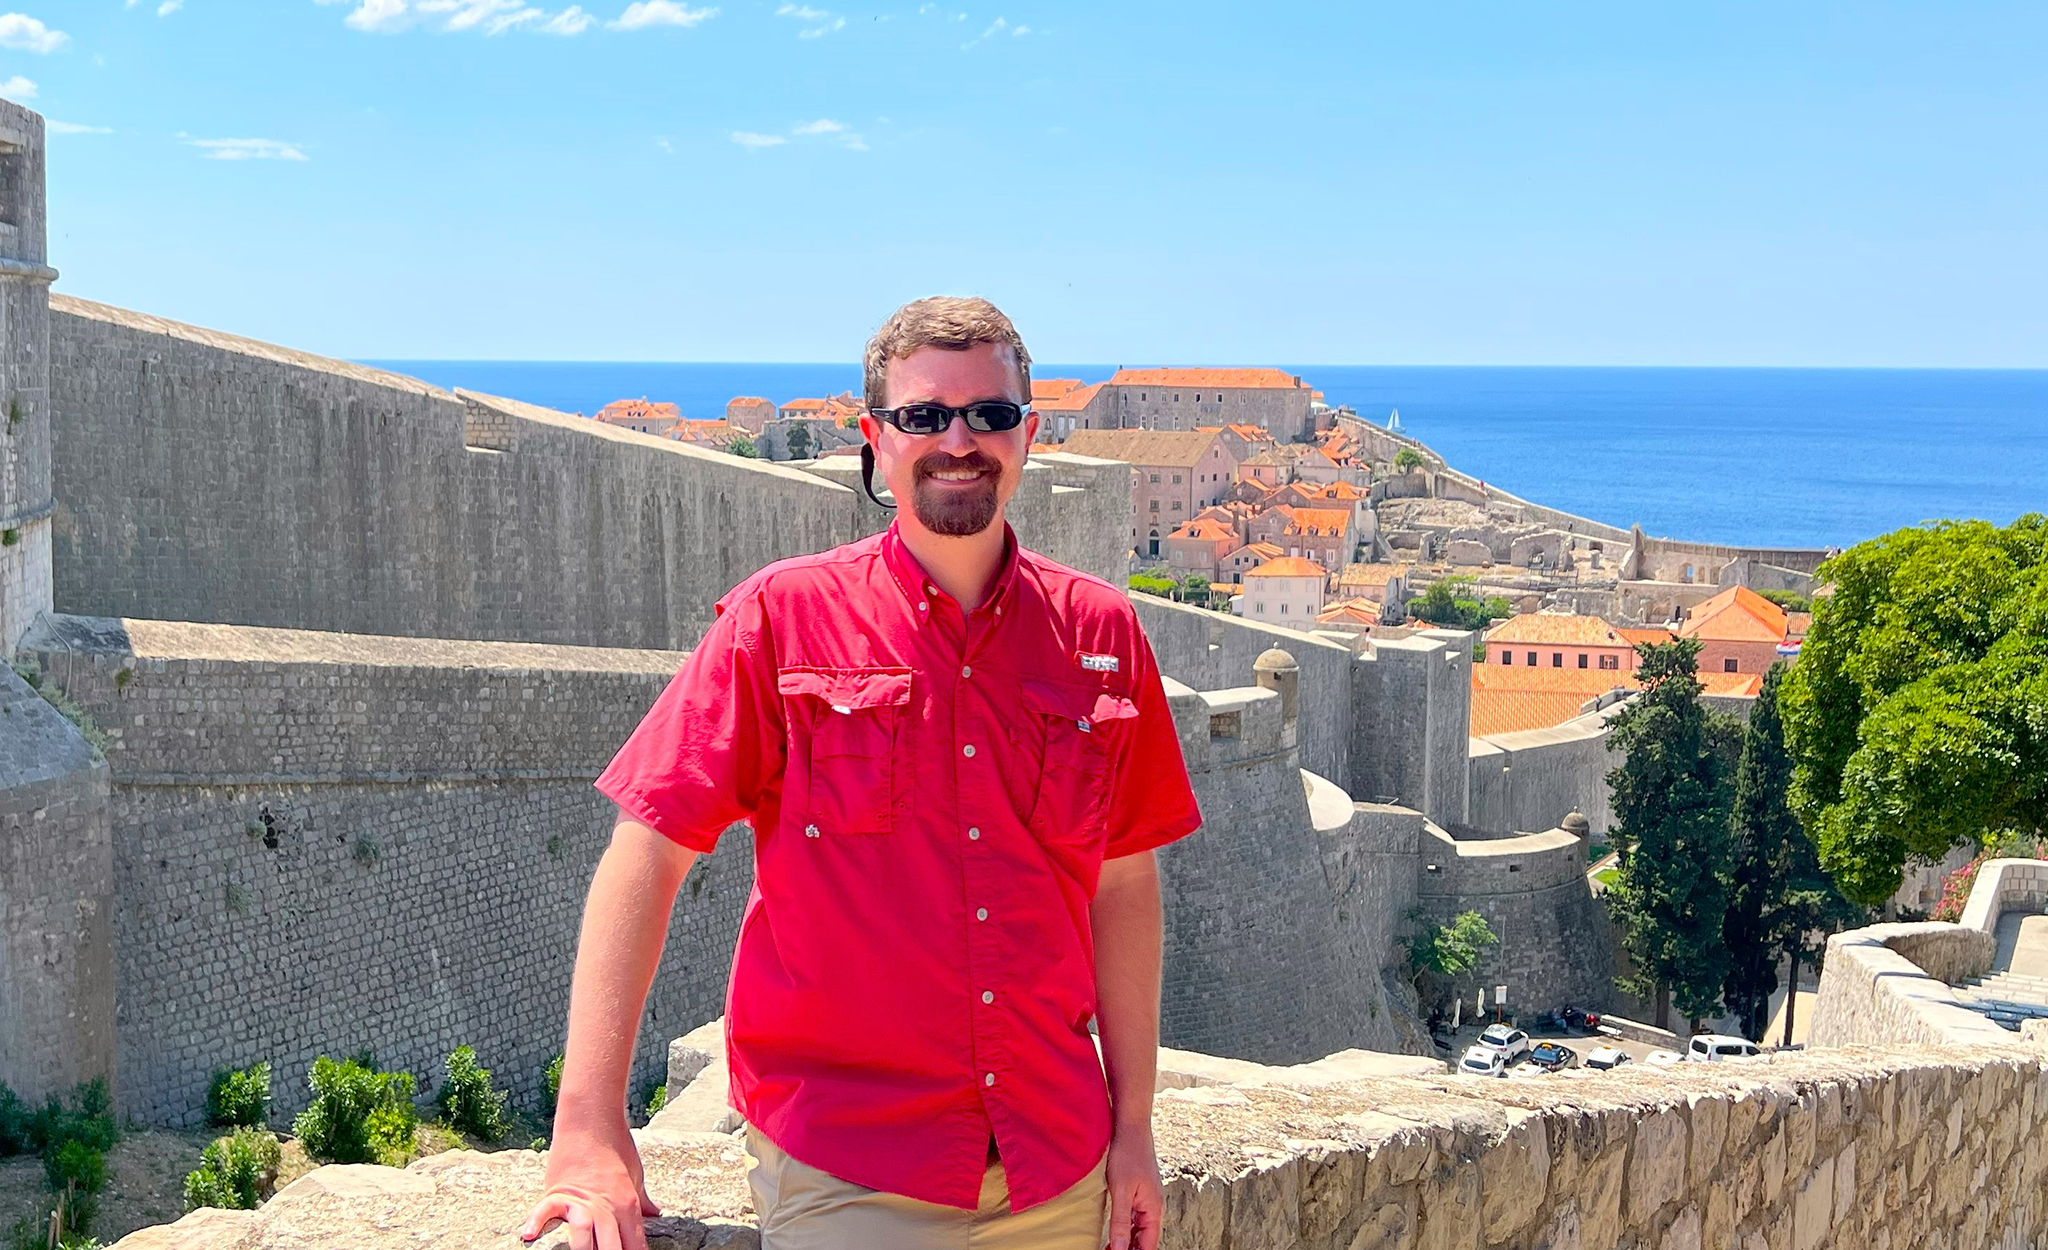 Matthew Becker, research associate for outcomes assessment and learning advancement at the School of Pharmacy, visits Dubrovnik, Croatia, in 2022. Becker recently attended a workshop at Arizona State University to share his expertise on the Balkans region. Submitted photo